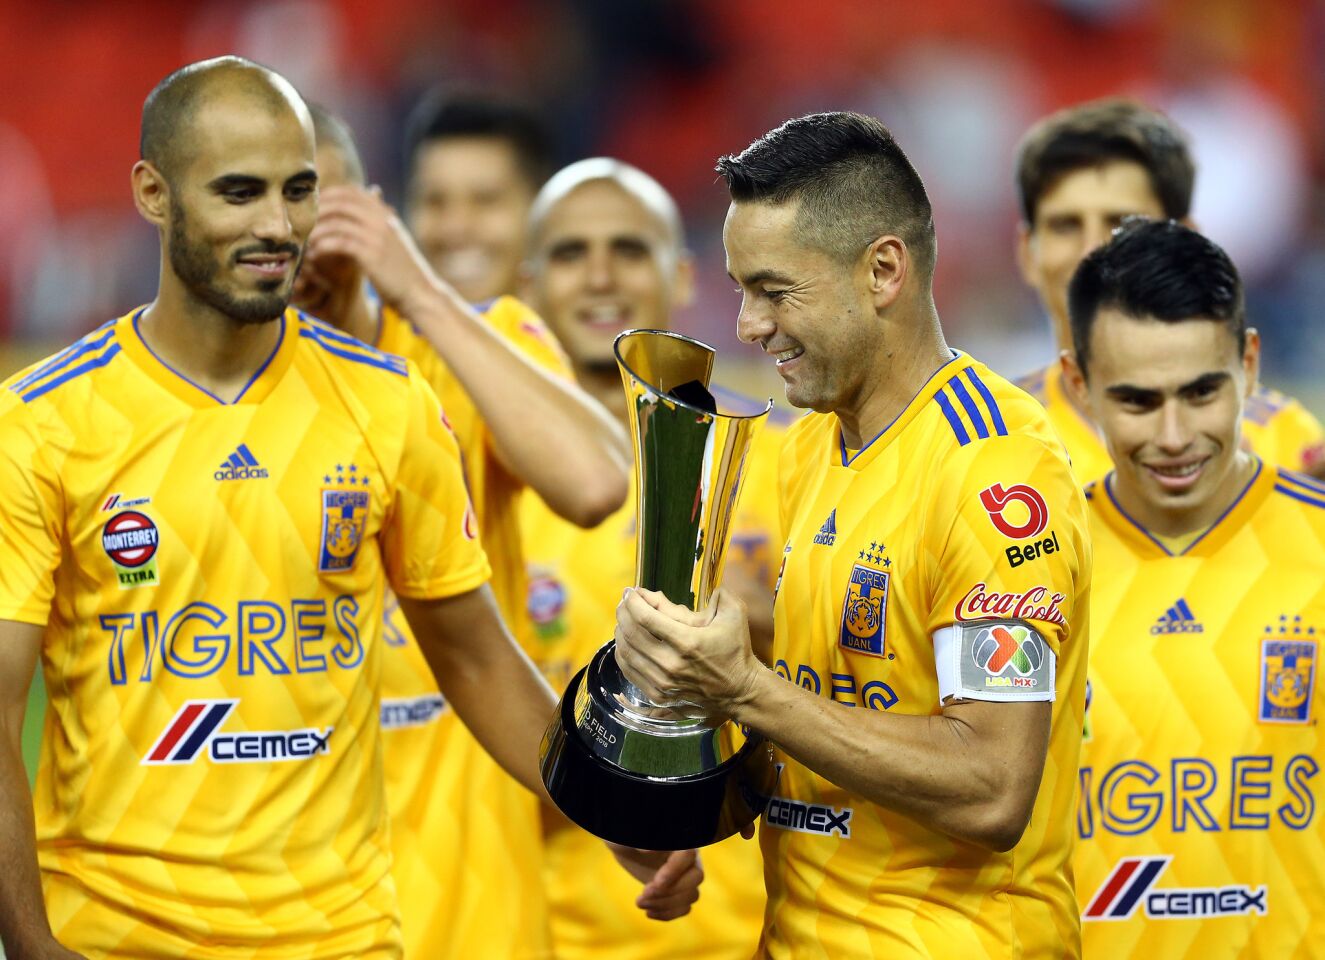 TORONTO, ON - SEPTEMBER 19: Juninho #3 of Tigres UANL prepares to lift the 2018 Campeones Cup Final trophy after victory against Toronto FC at BMO Field on September 19, 2018 in Toronto, Canada. (Photo by Vaughn Ridley/Getty Images) ** OUTS - ELSENT, FPG, CM - OUTS * NM, PH, VA if sourced by CT, LA or MoD **